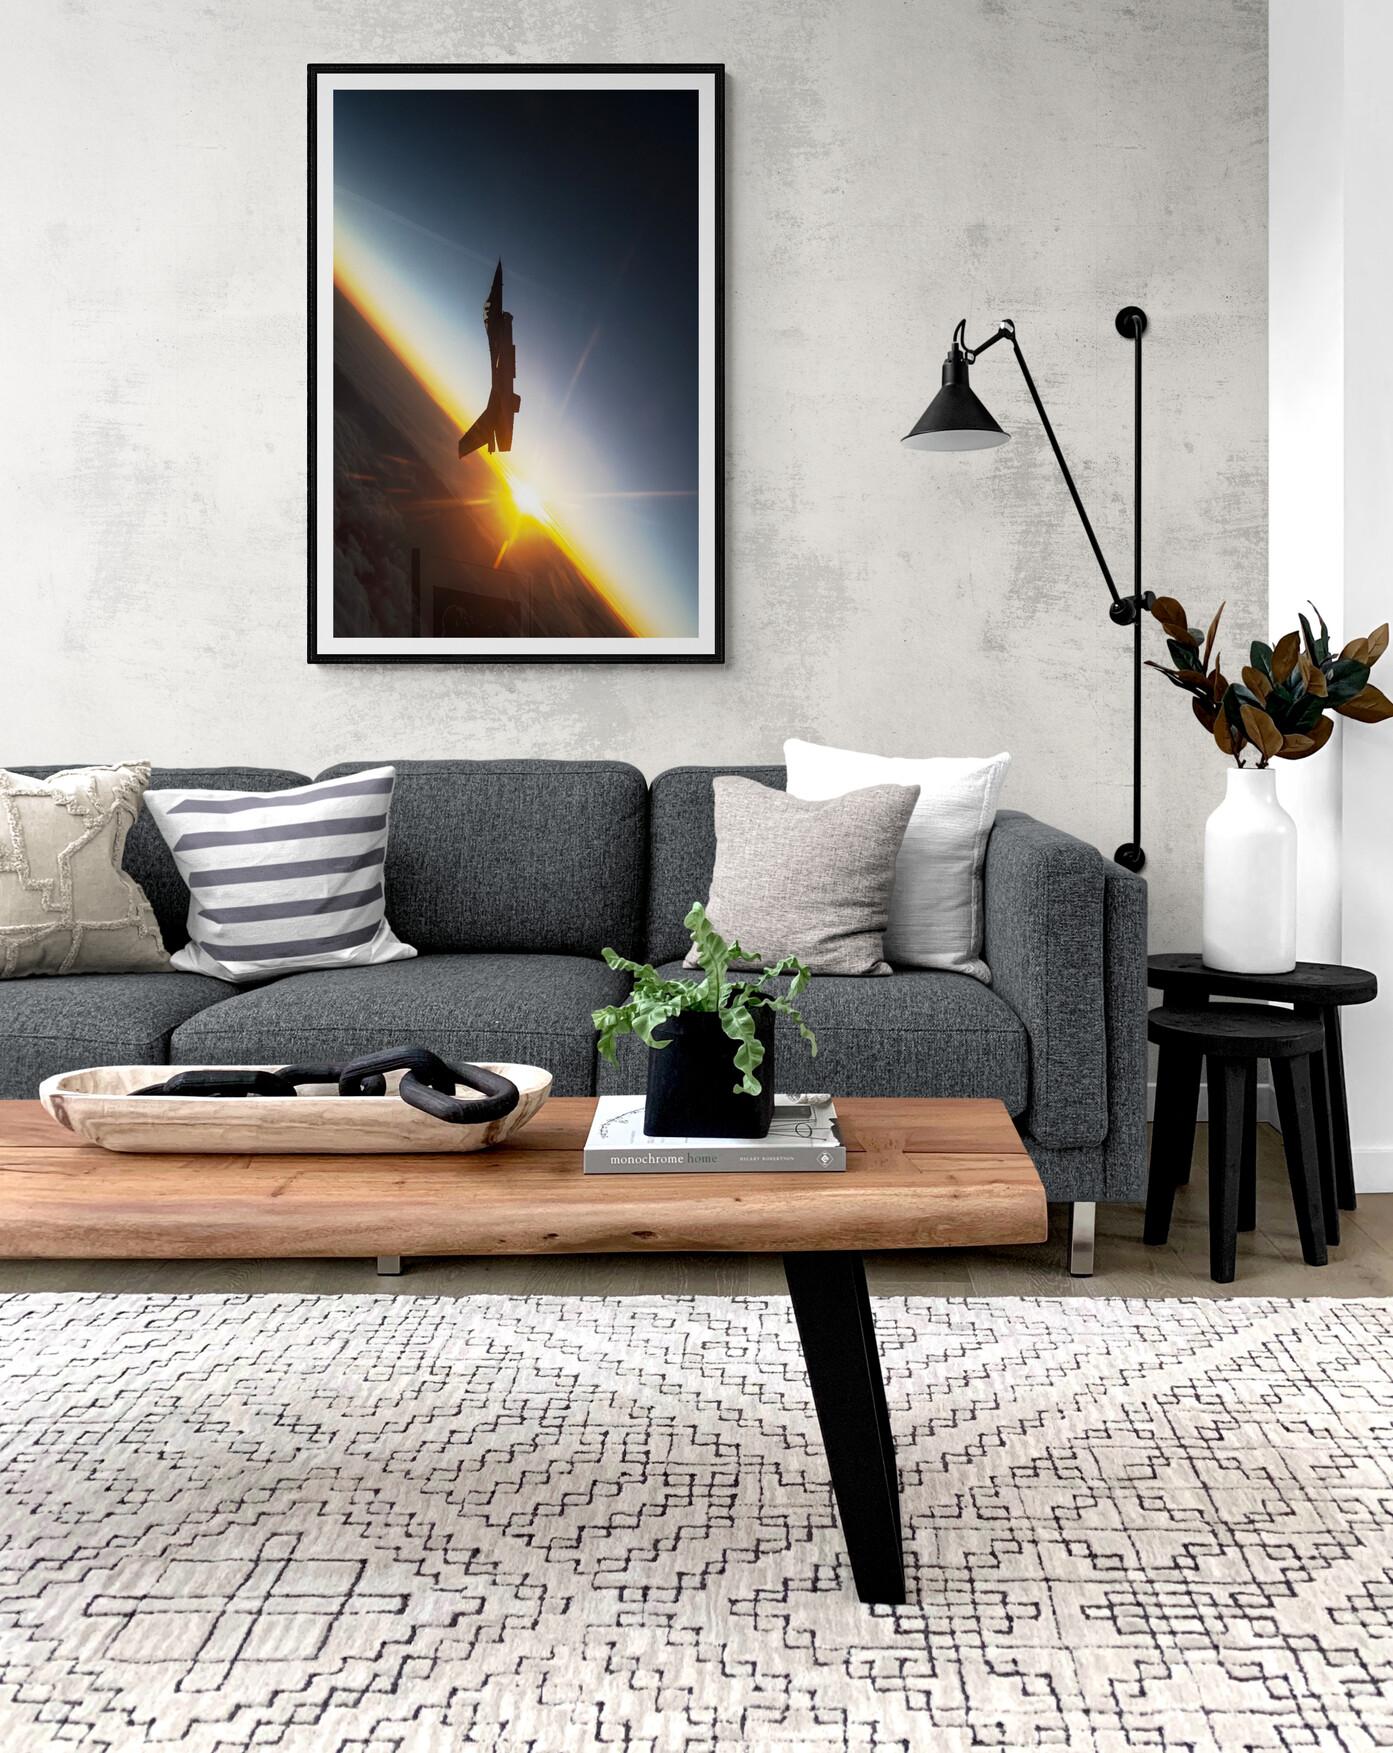 This is # 1/7 Fine Art Print Limited Edition 42 cm x 60 cm
VADOR THE SPACE SHOW is the first exhibition of photographs by Stefan Darte which is currently being held in Brussels in the coworking area named The Spaces (Gare Maritime - Tour & Taxis)